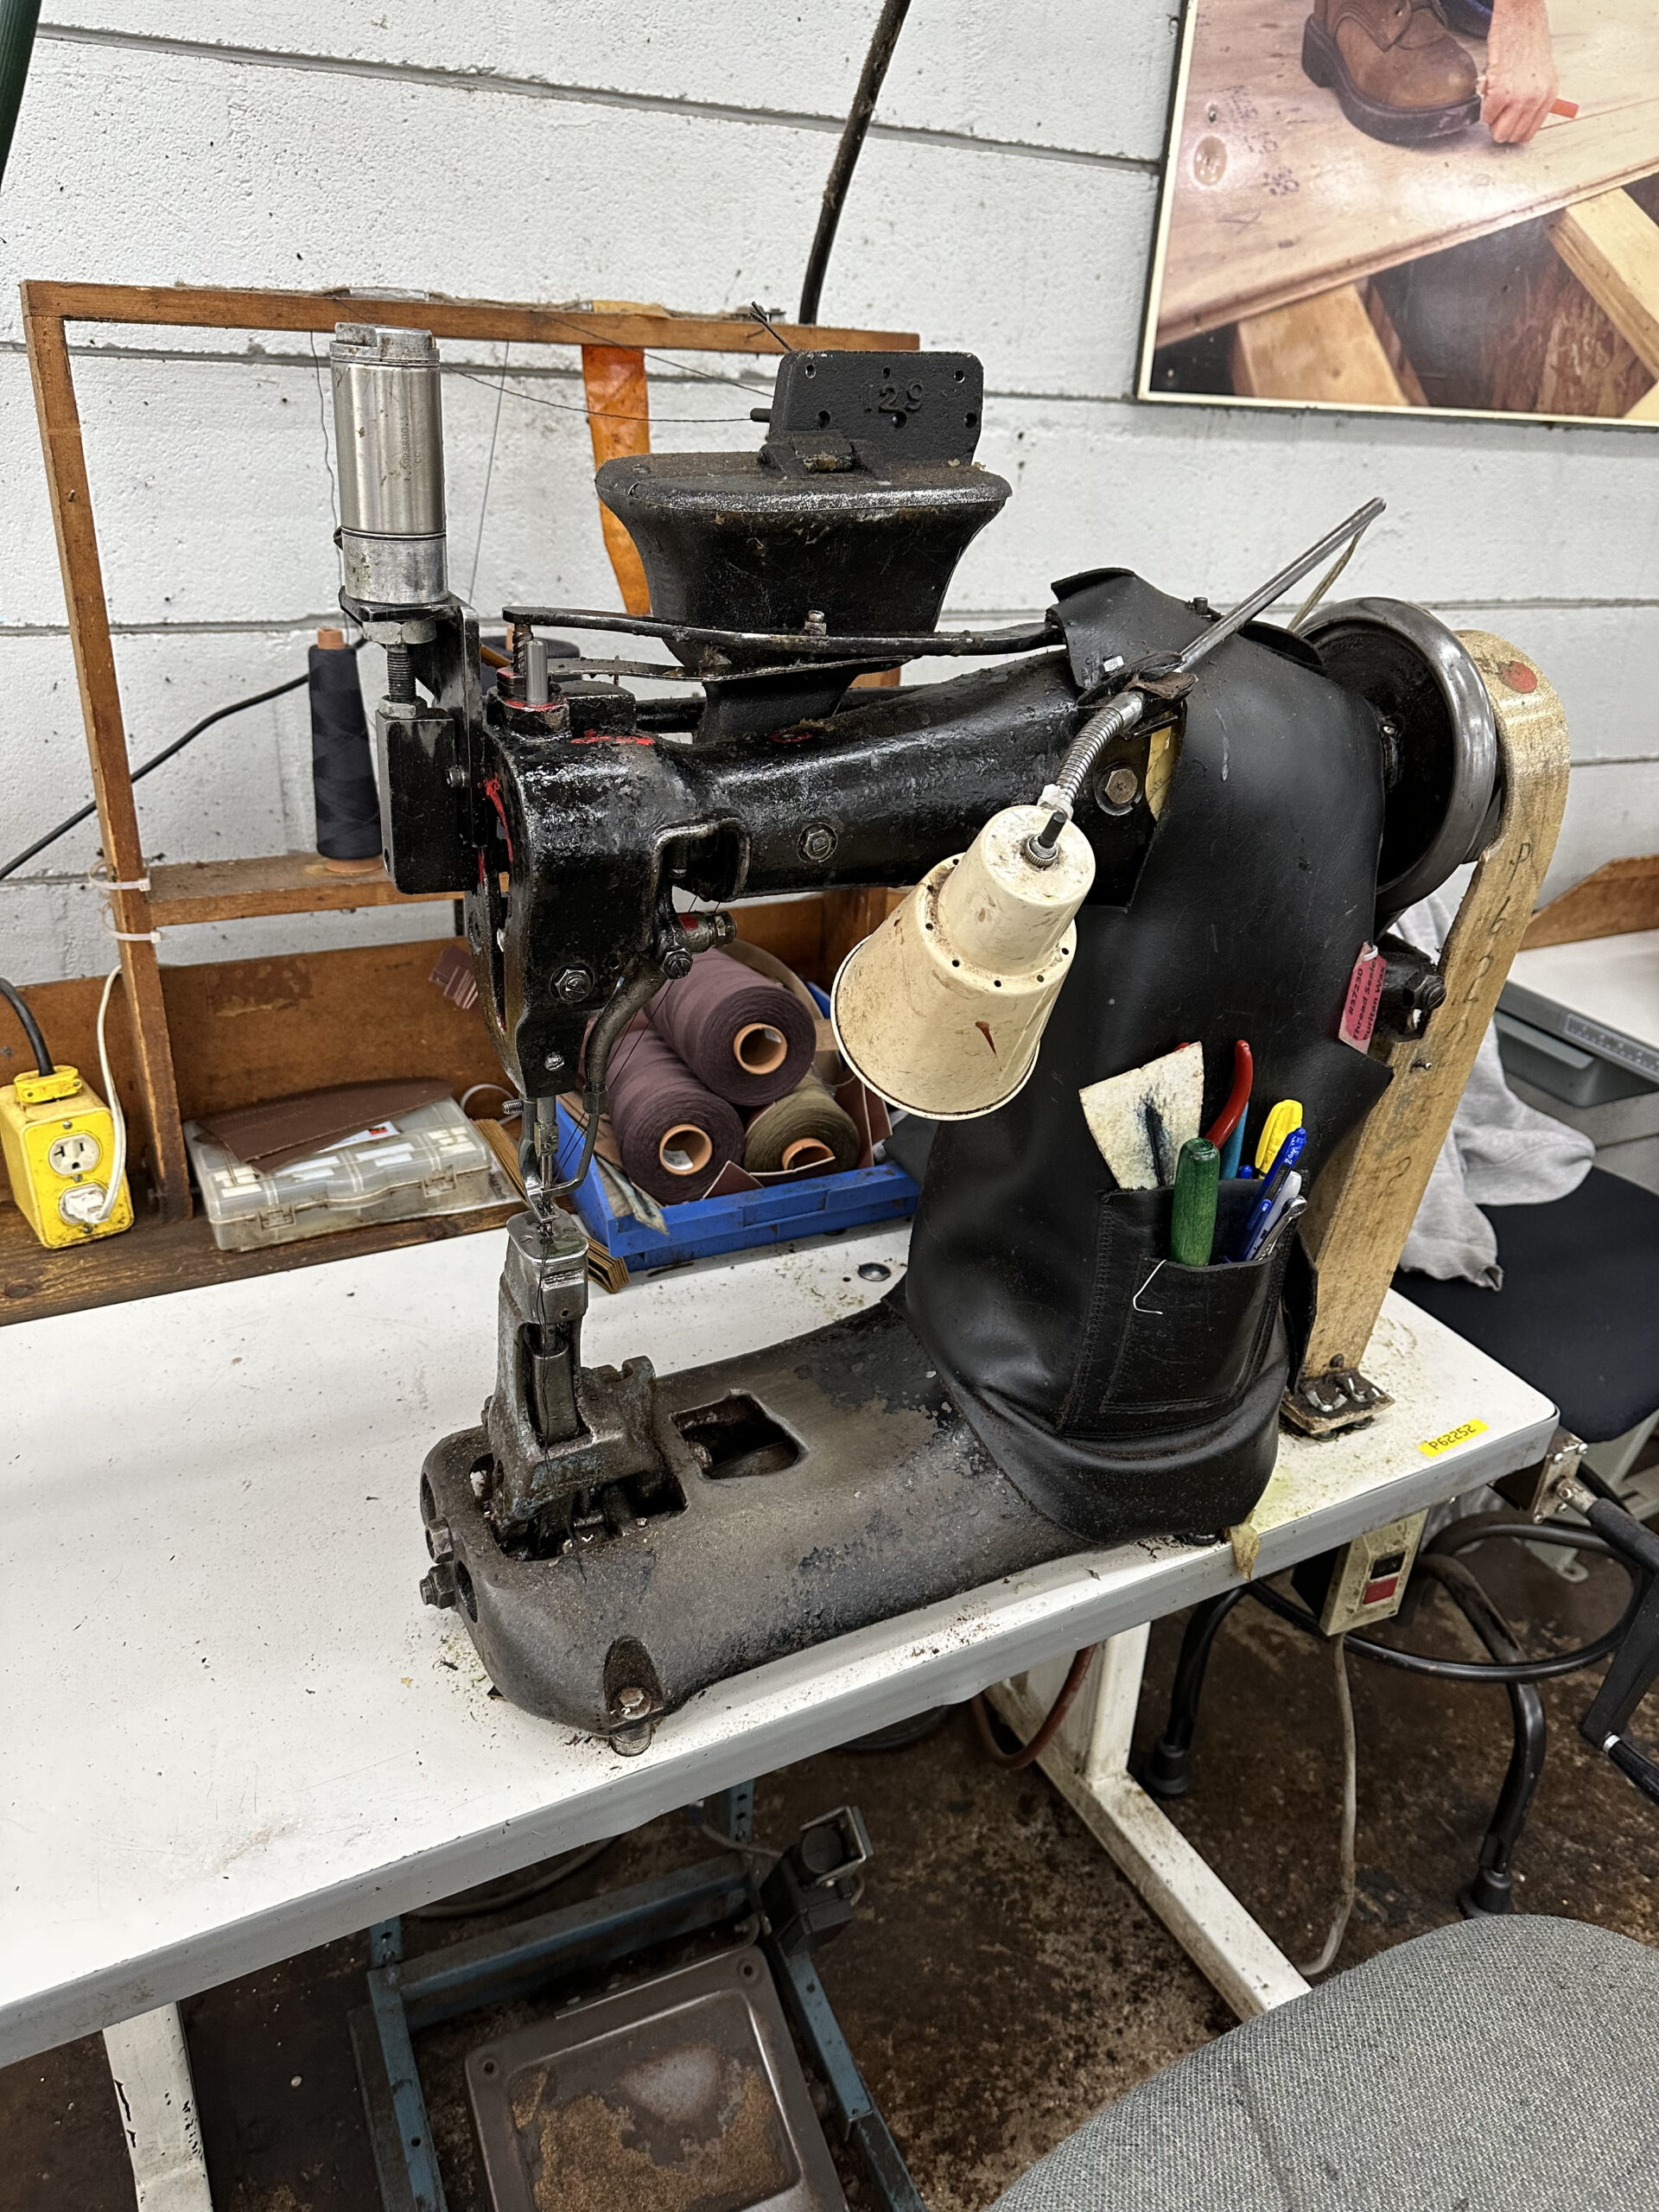 red wing shoes puritan sewing machine